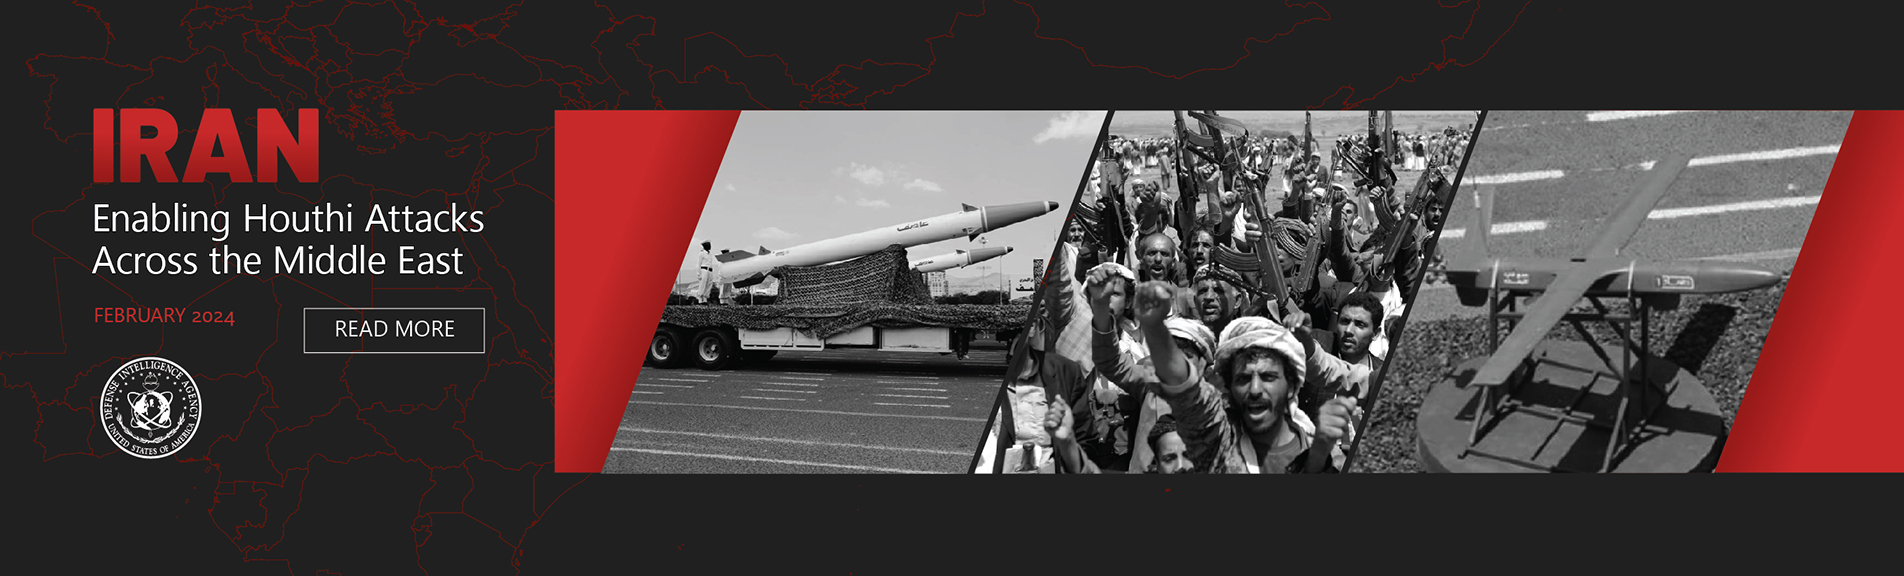 Image with a dark background with red outlines of countries. Pictures in the middle of a missile, people, and a UAV. Above the three pictures are the words. IRAN. Enabling Houthi Attacks Across the Middle East. February, 2024.